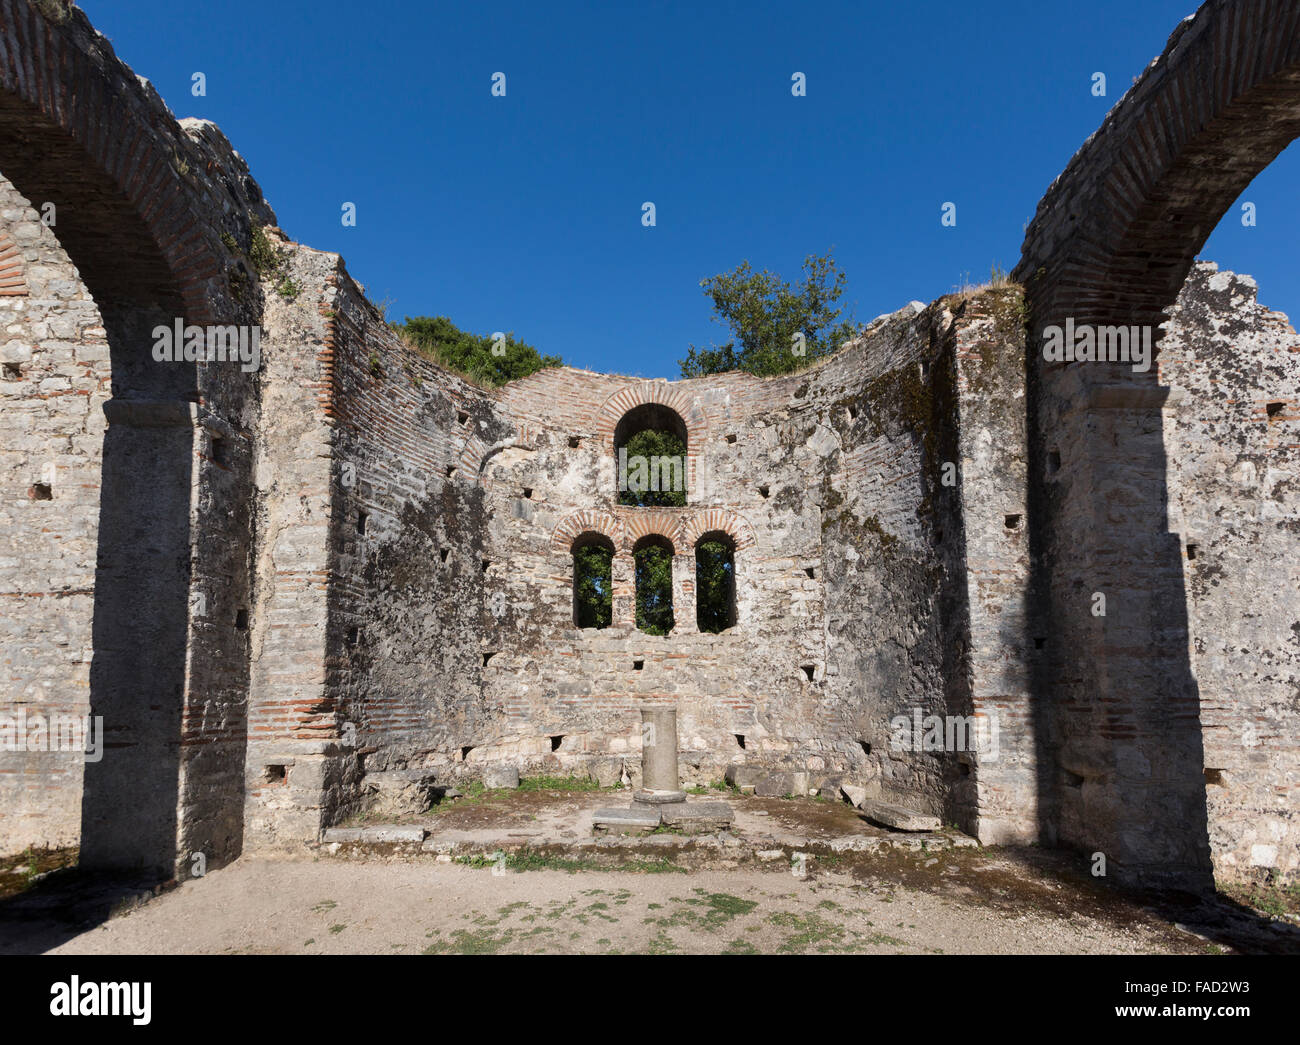 Albania.  Butrint or Buthrotum archaeological site; a UNESCO World Heritage Site. The Great Basilica.  Interior. Stock Photo